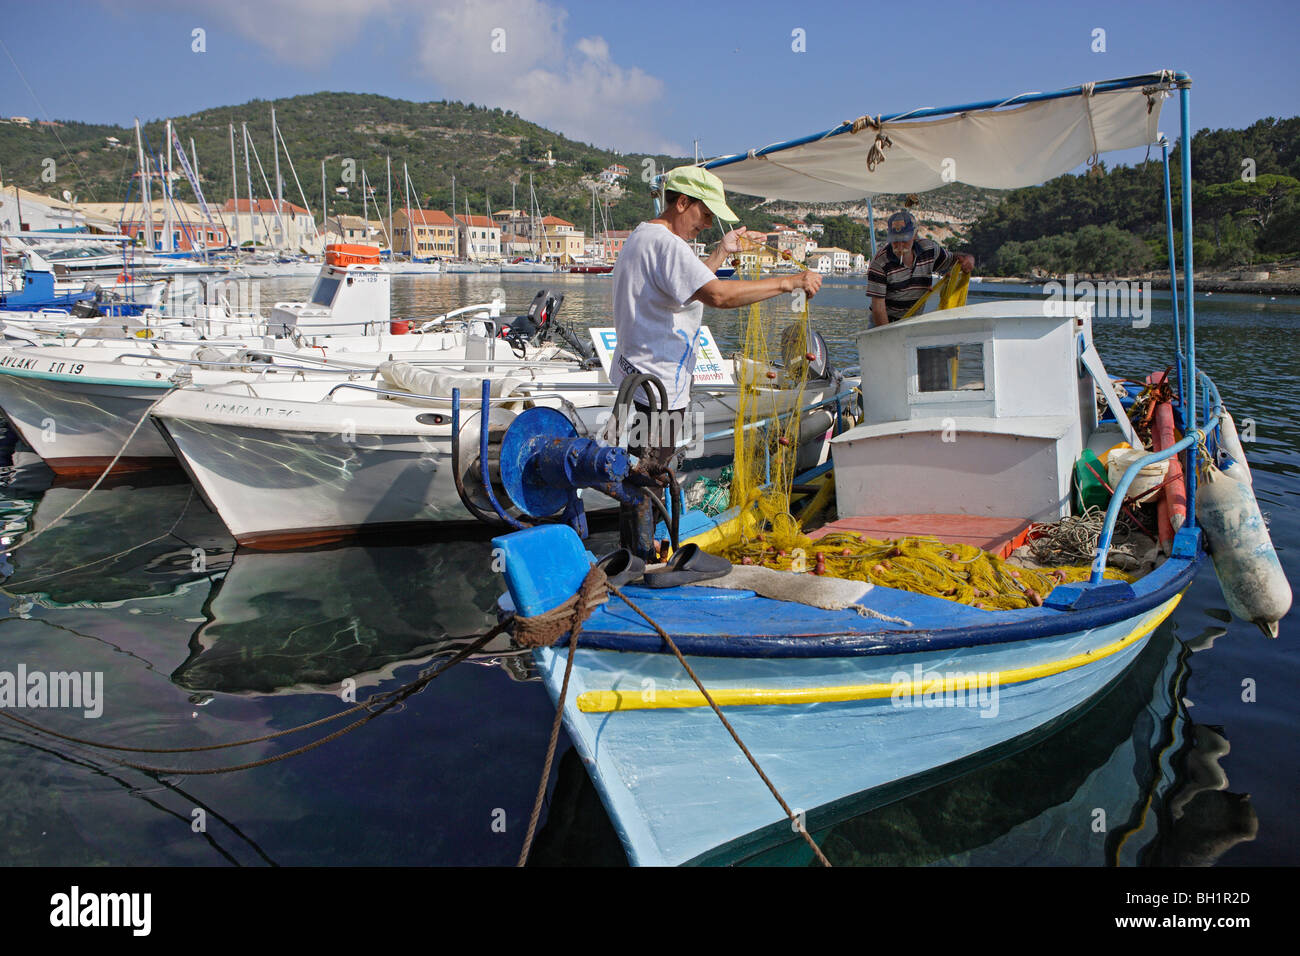 Two men working on a boat in Gaios harbour, Paxos, Ionian Islands, Greece Stock Photo